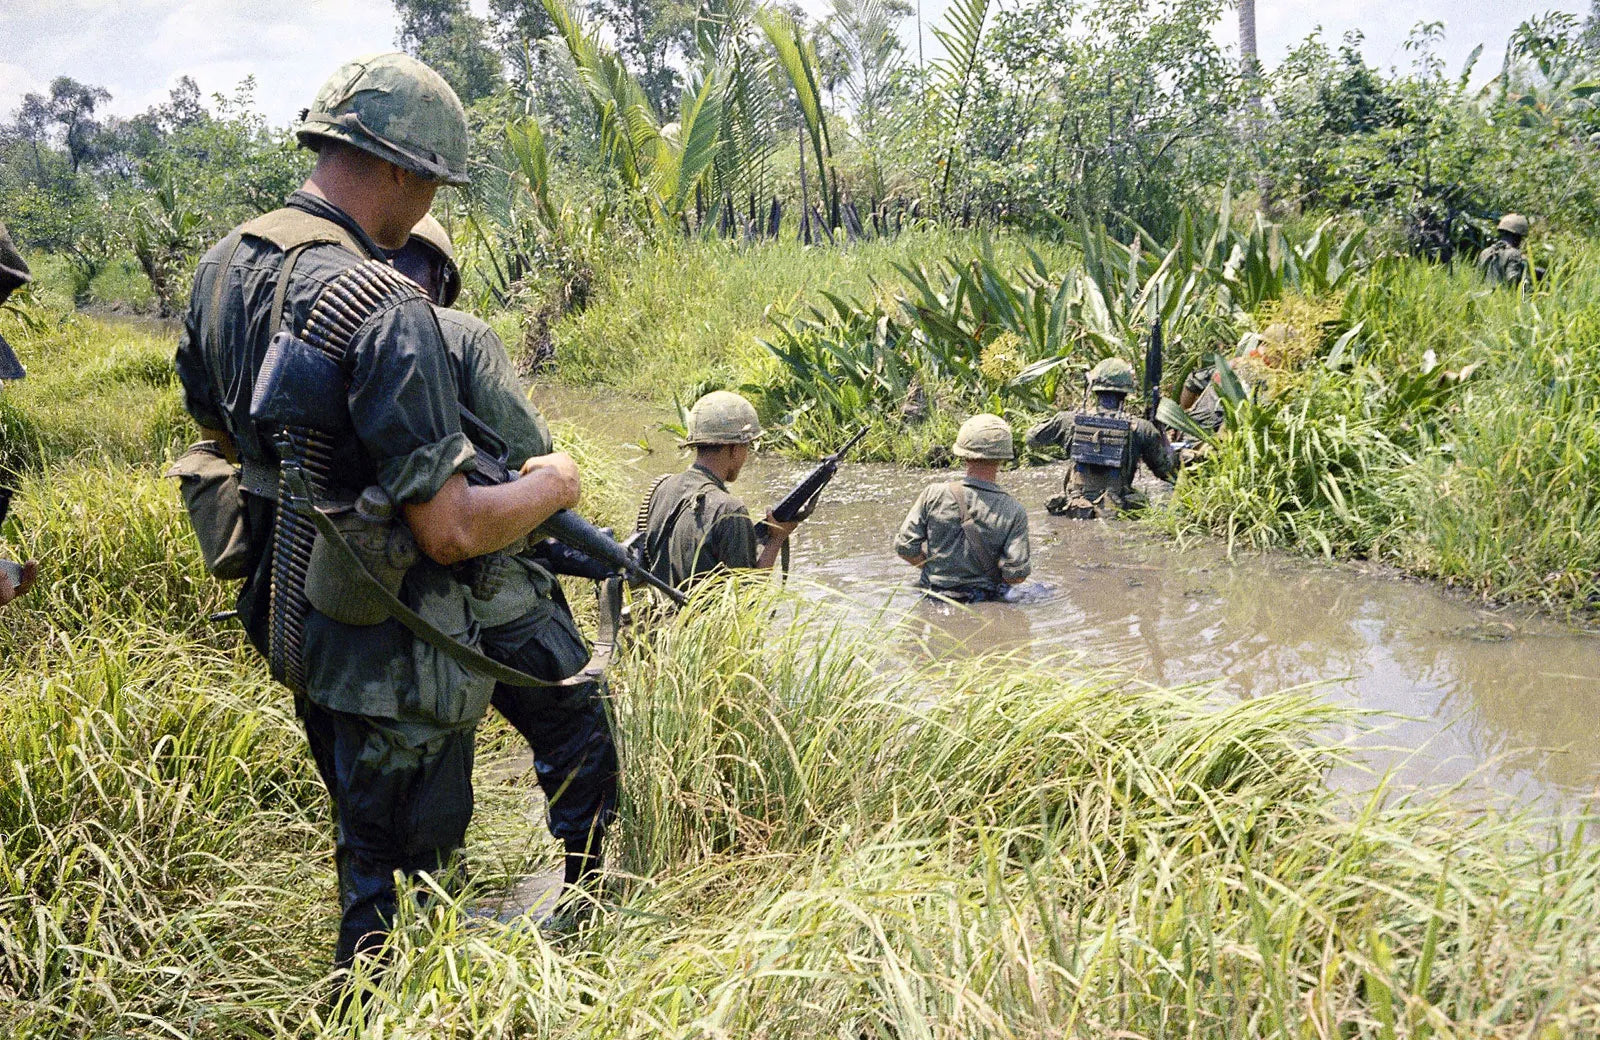 US Marines navigating through a marshy swamp during the Vietnam War in 1965, representing the Tactically Acquired USMC Vietnam War merchandise collection.